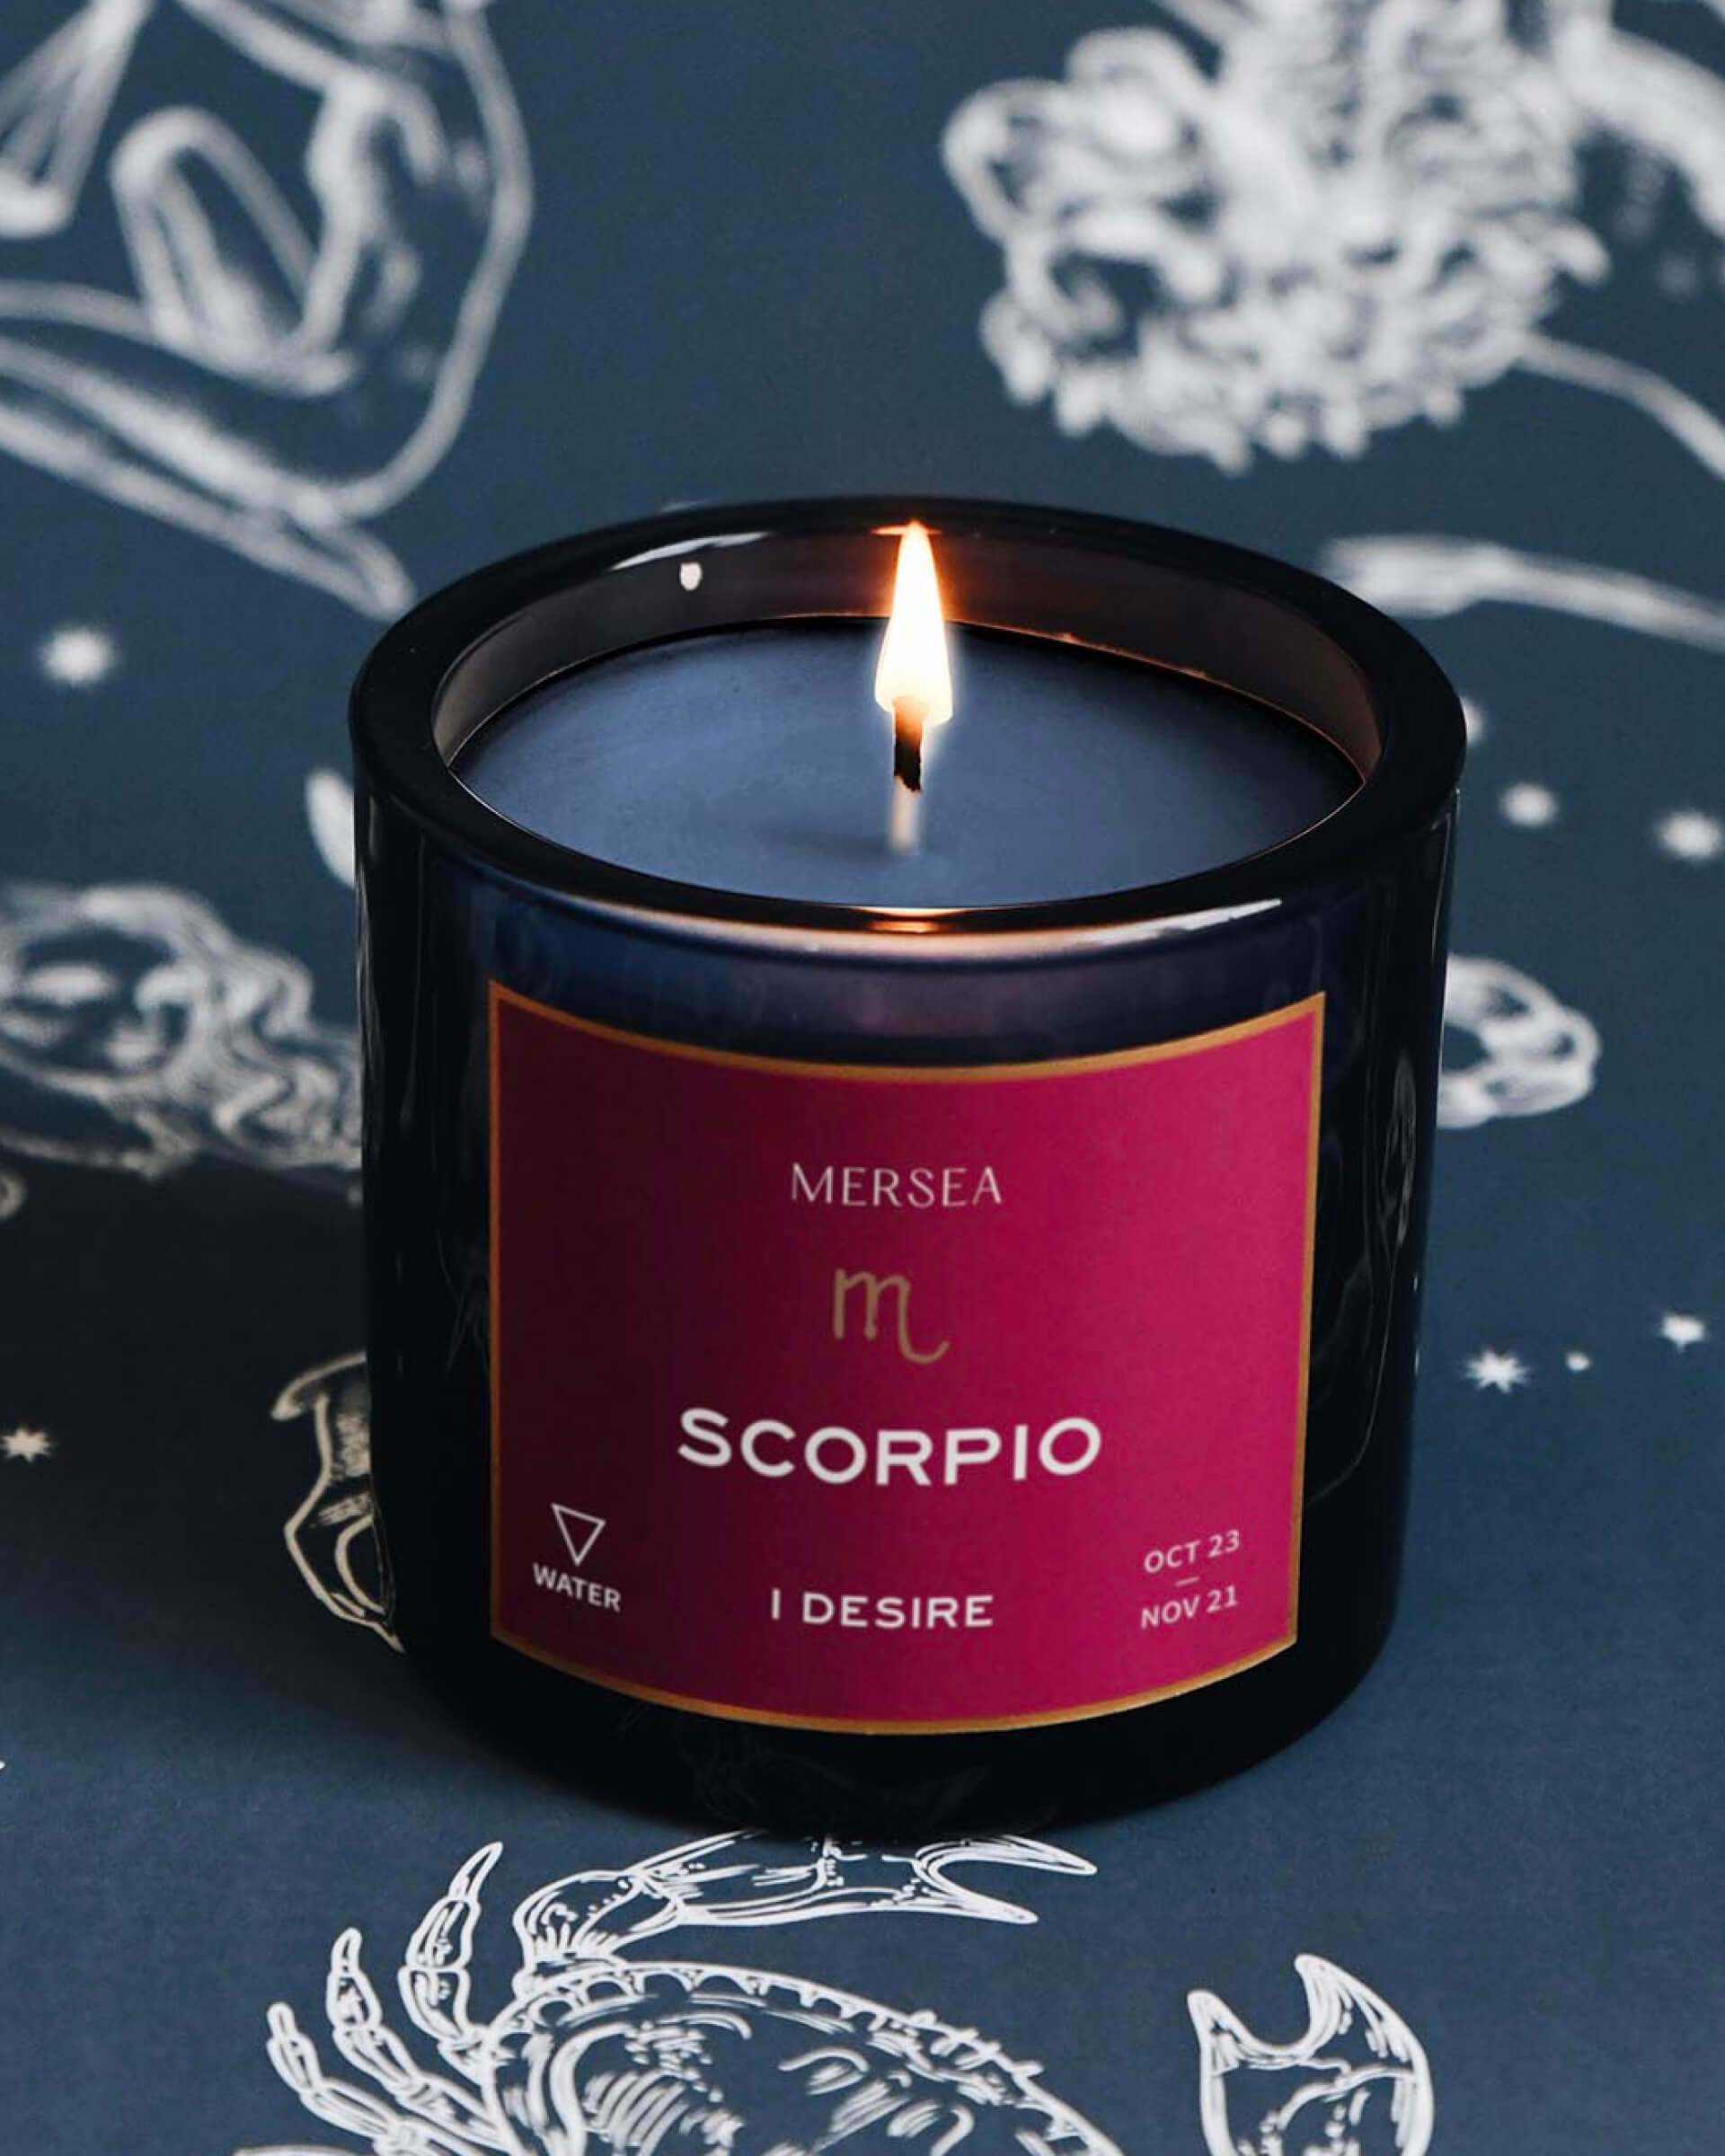 Mersea Scorpio candle against astrology sign background